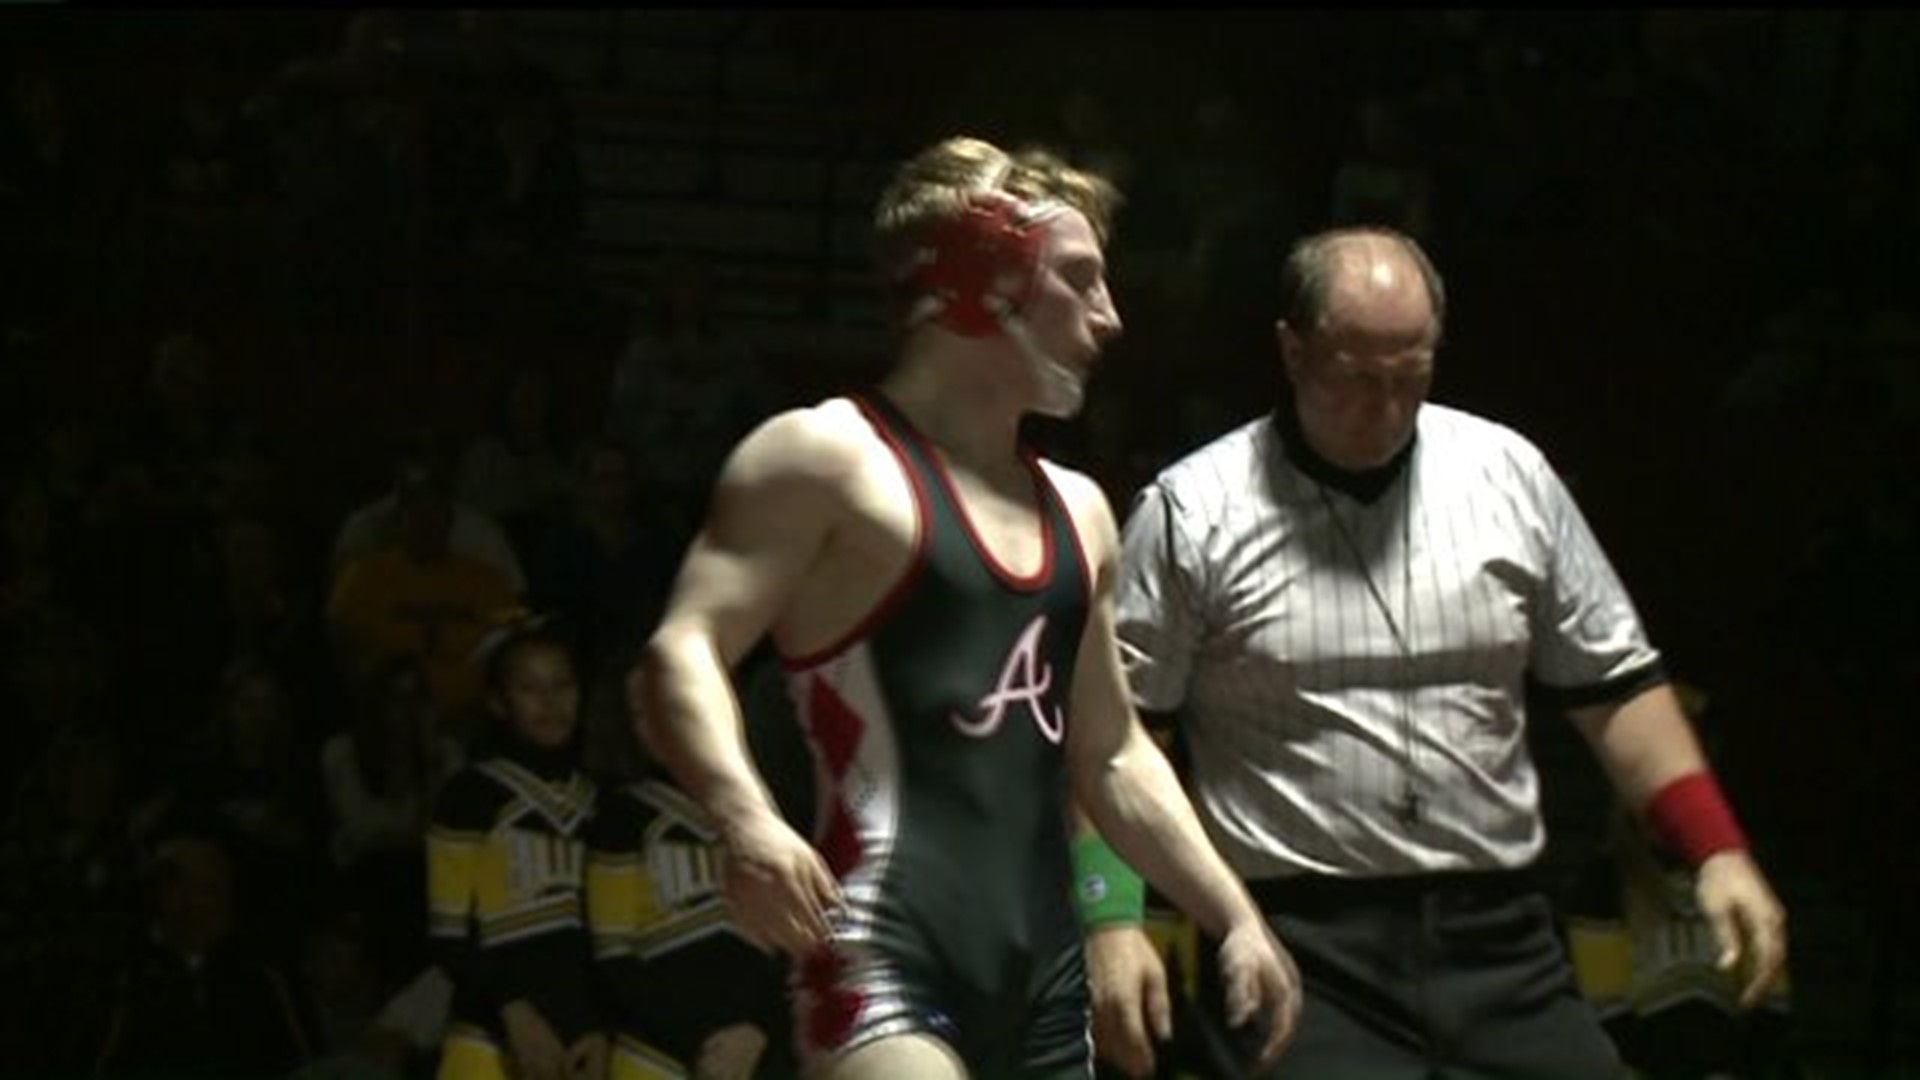 Asuumption pins way to victory